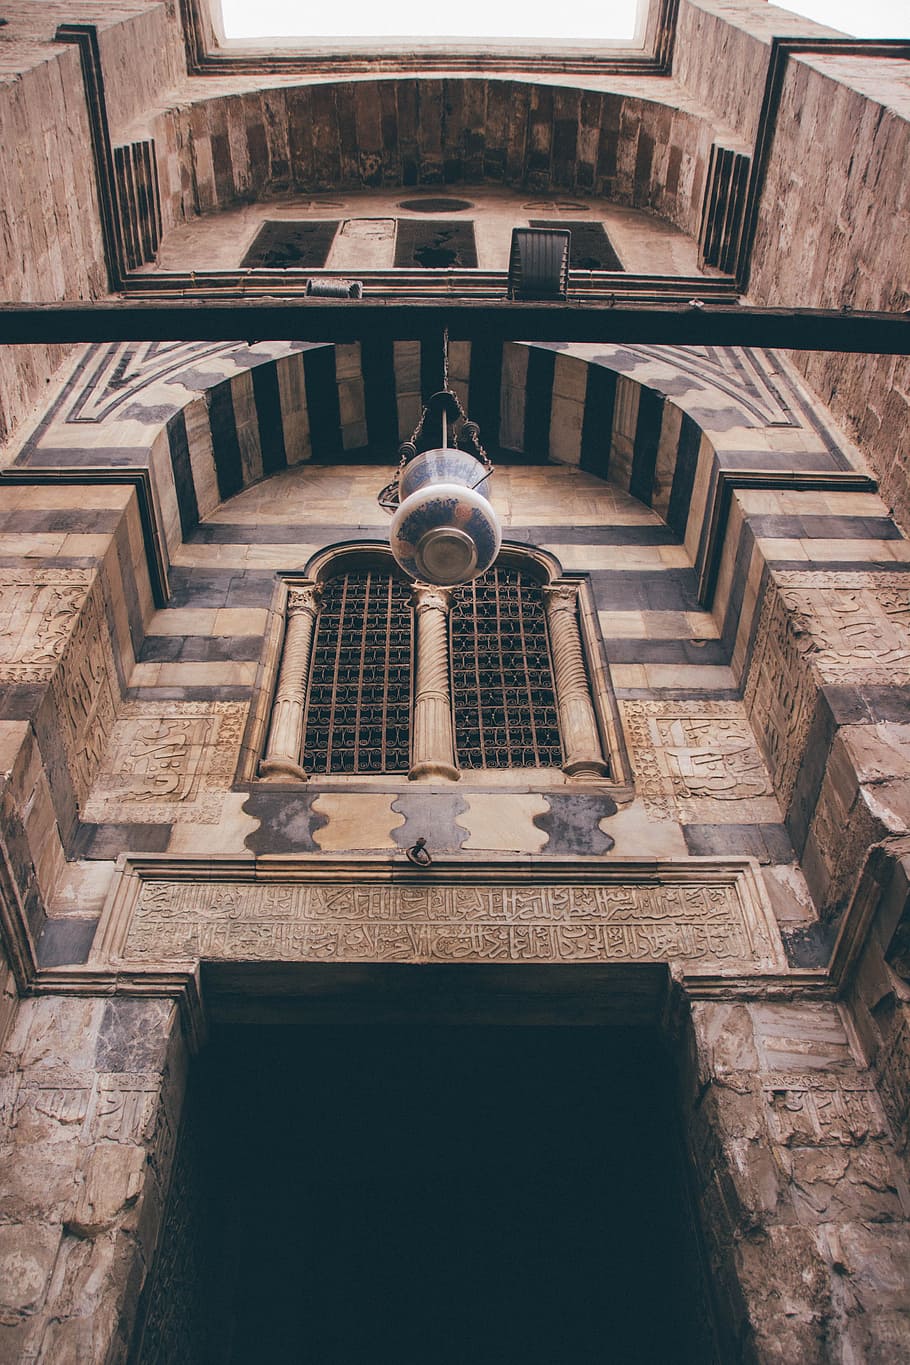 Travel, Old, Architecture, Egypt, Mosque, cairo, islamic, street photography, المعز, low angle view